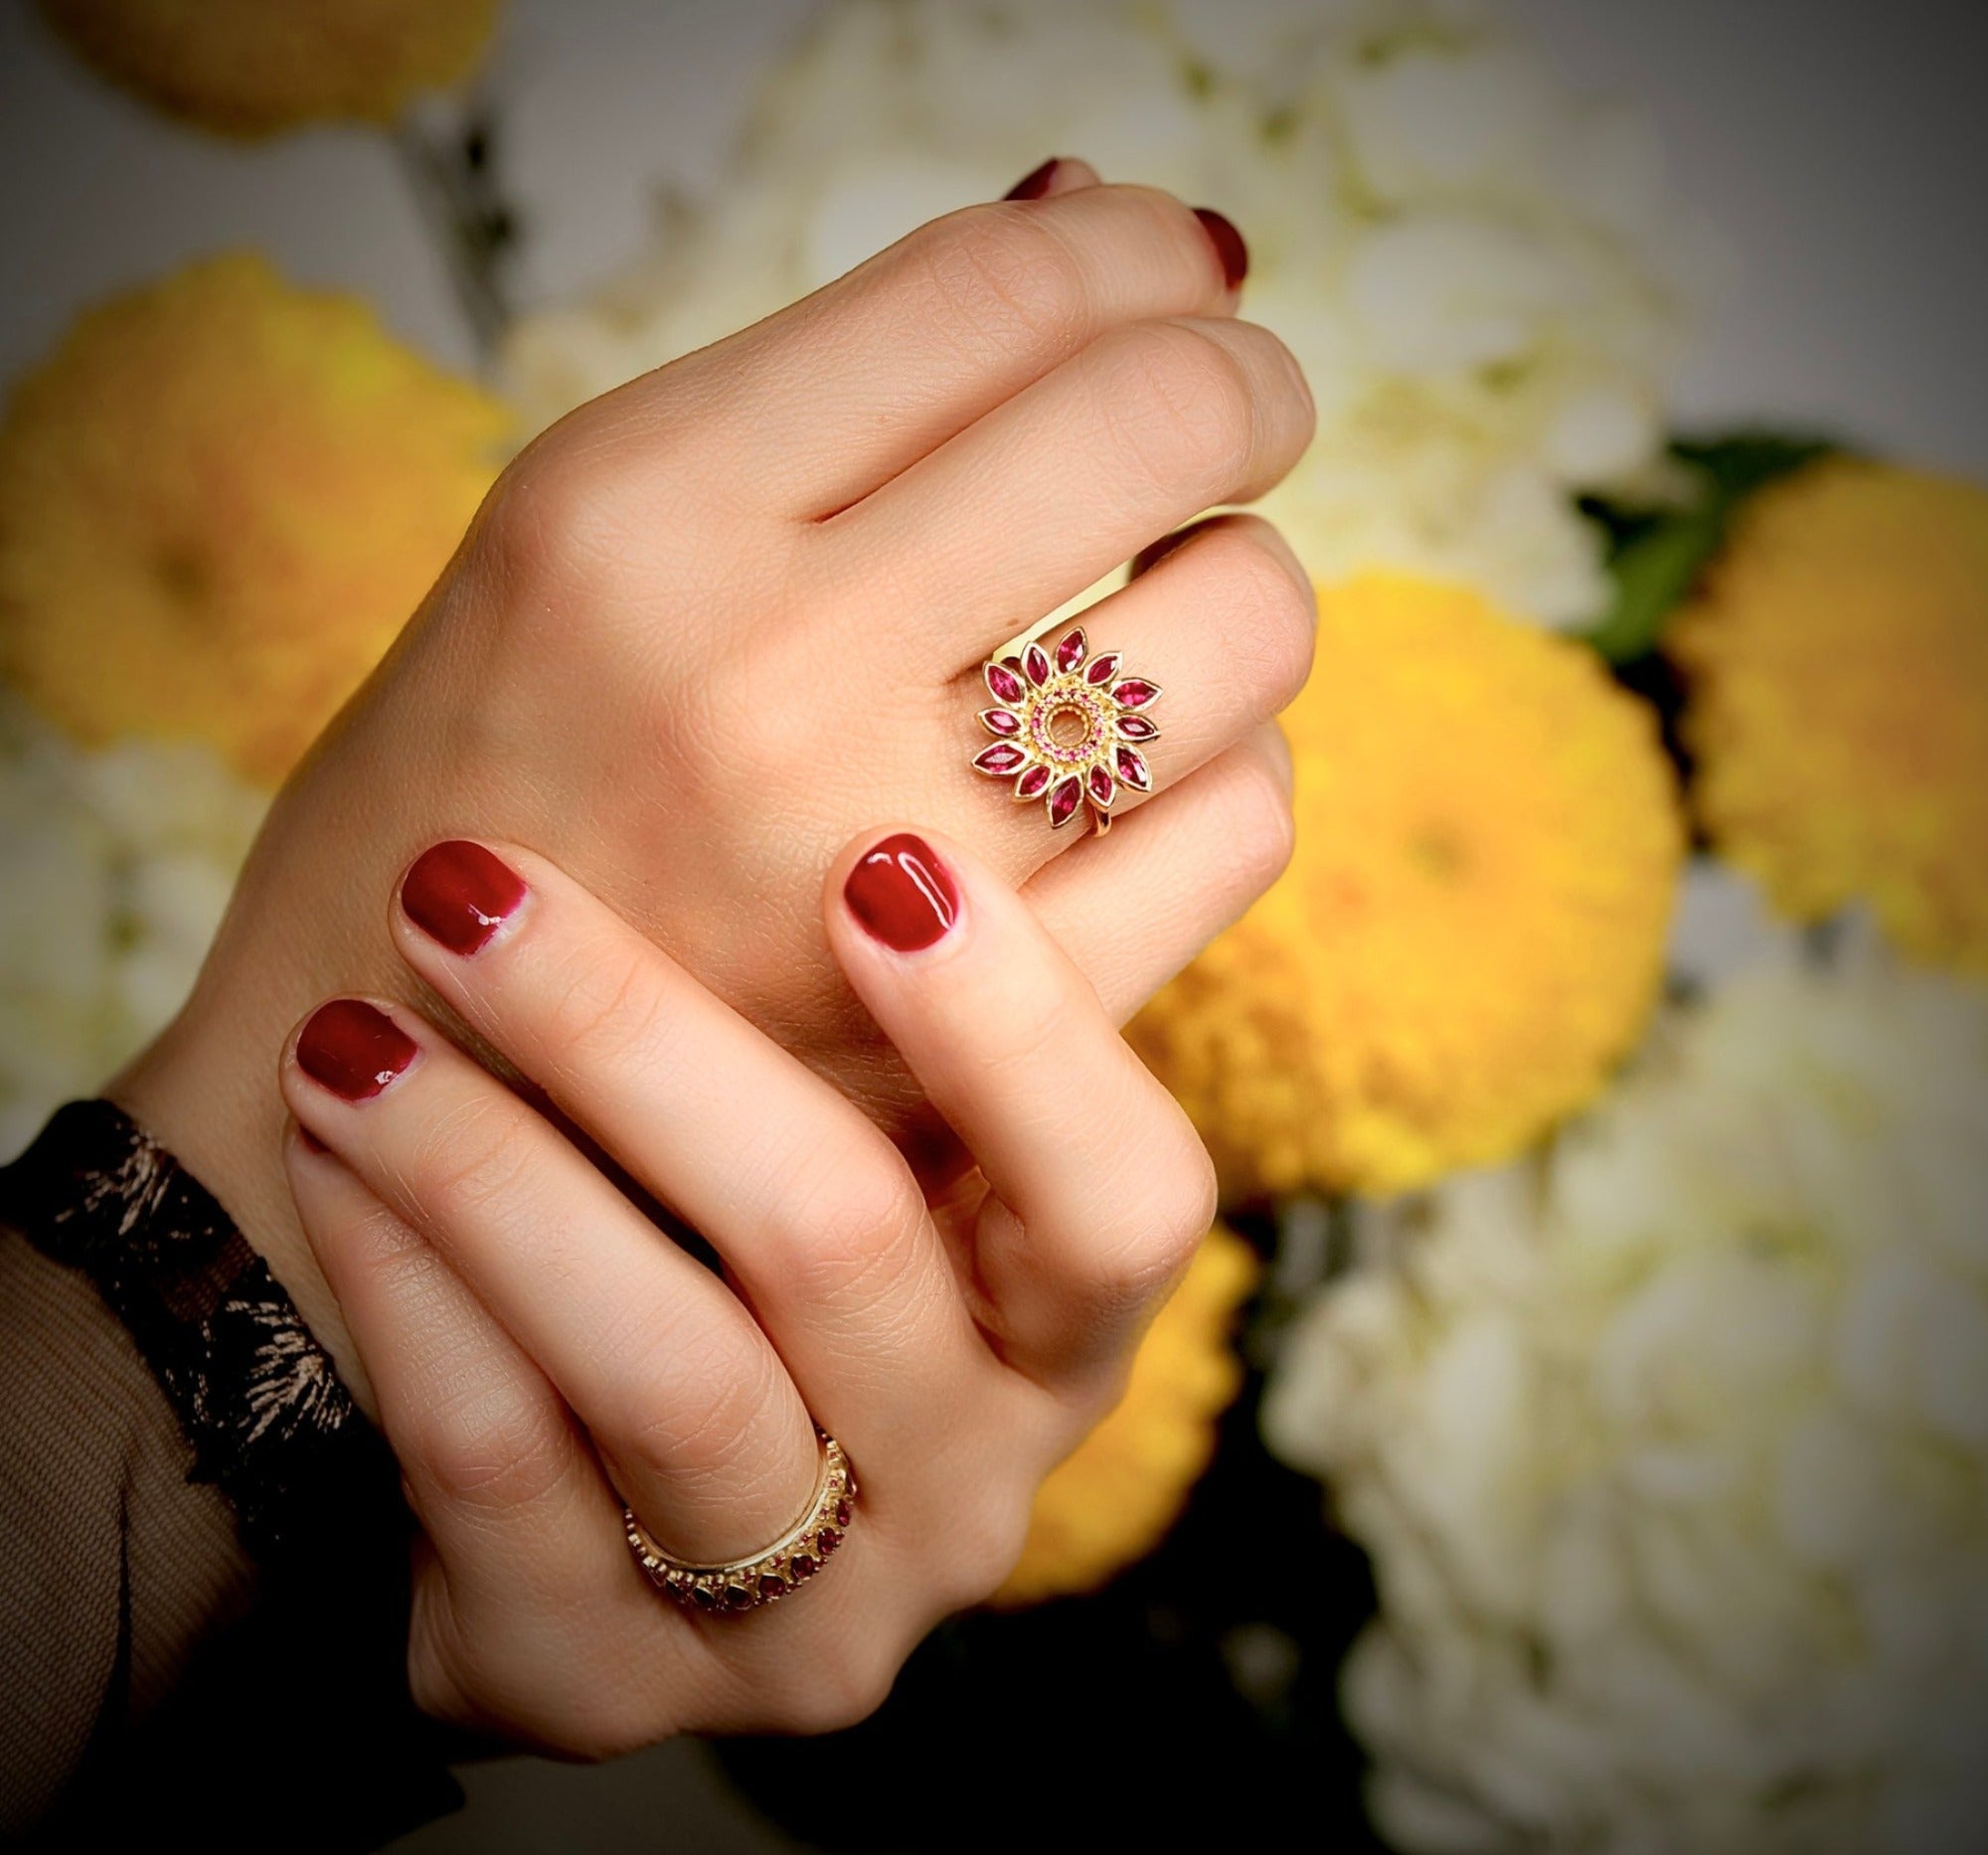 Alicia - Ruby Flower Ring – La Fleur Rouge Collection of Rubies & Solid Gold-Aurora Laffite Jewelry